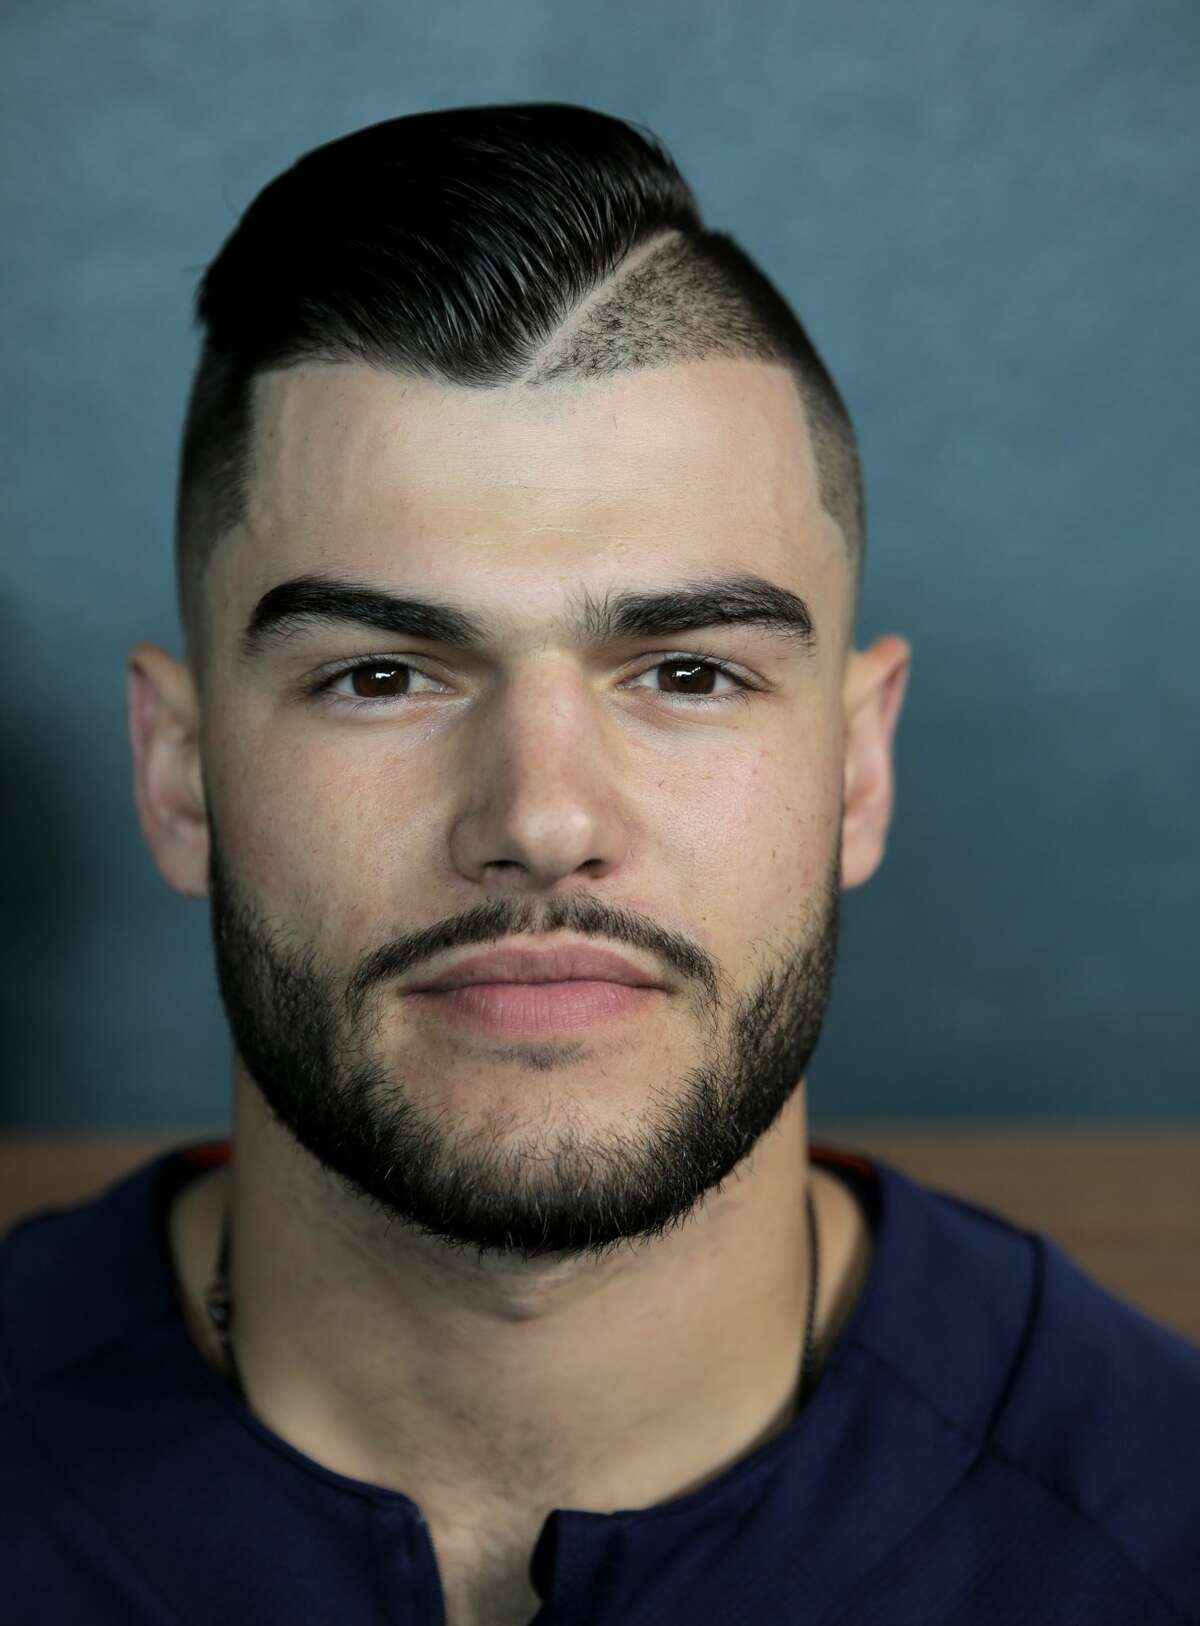 Houston Astros starting pitcher Lance McCullers Jr. (43) and his hair style. Houston Astros and Baltimore Orioles in the second of a three-game series at Minute Maid Park on Saturday, May 27, 2017, in Houston. Astros lead the series 1-0. ( Elizabeth Conley / Houston Chronicle )